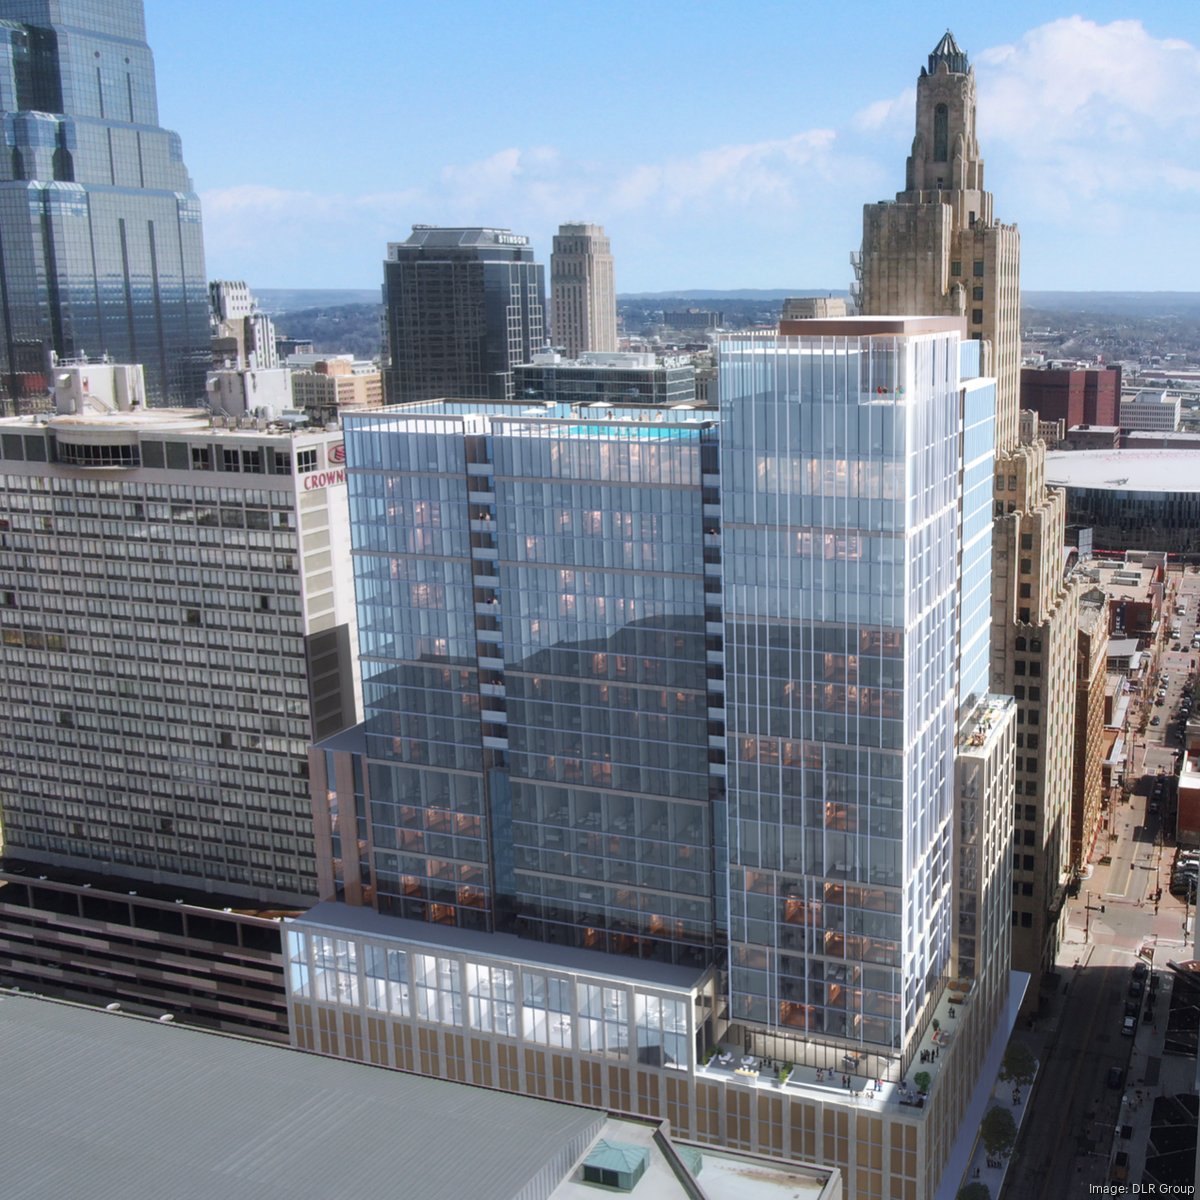 Lux Living high-rise in Downtown would cost close to $200M, seek $34M in  incentives - Kansas City Business Journal